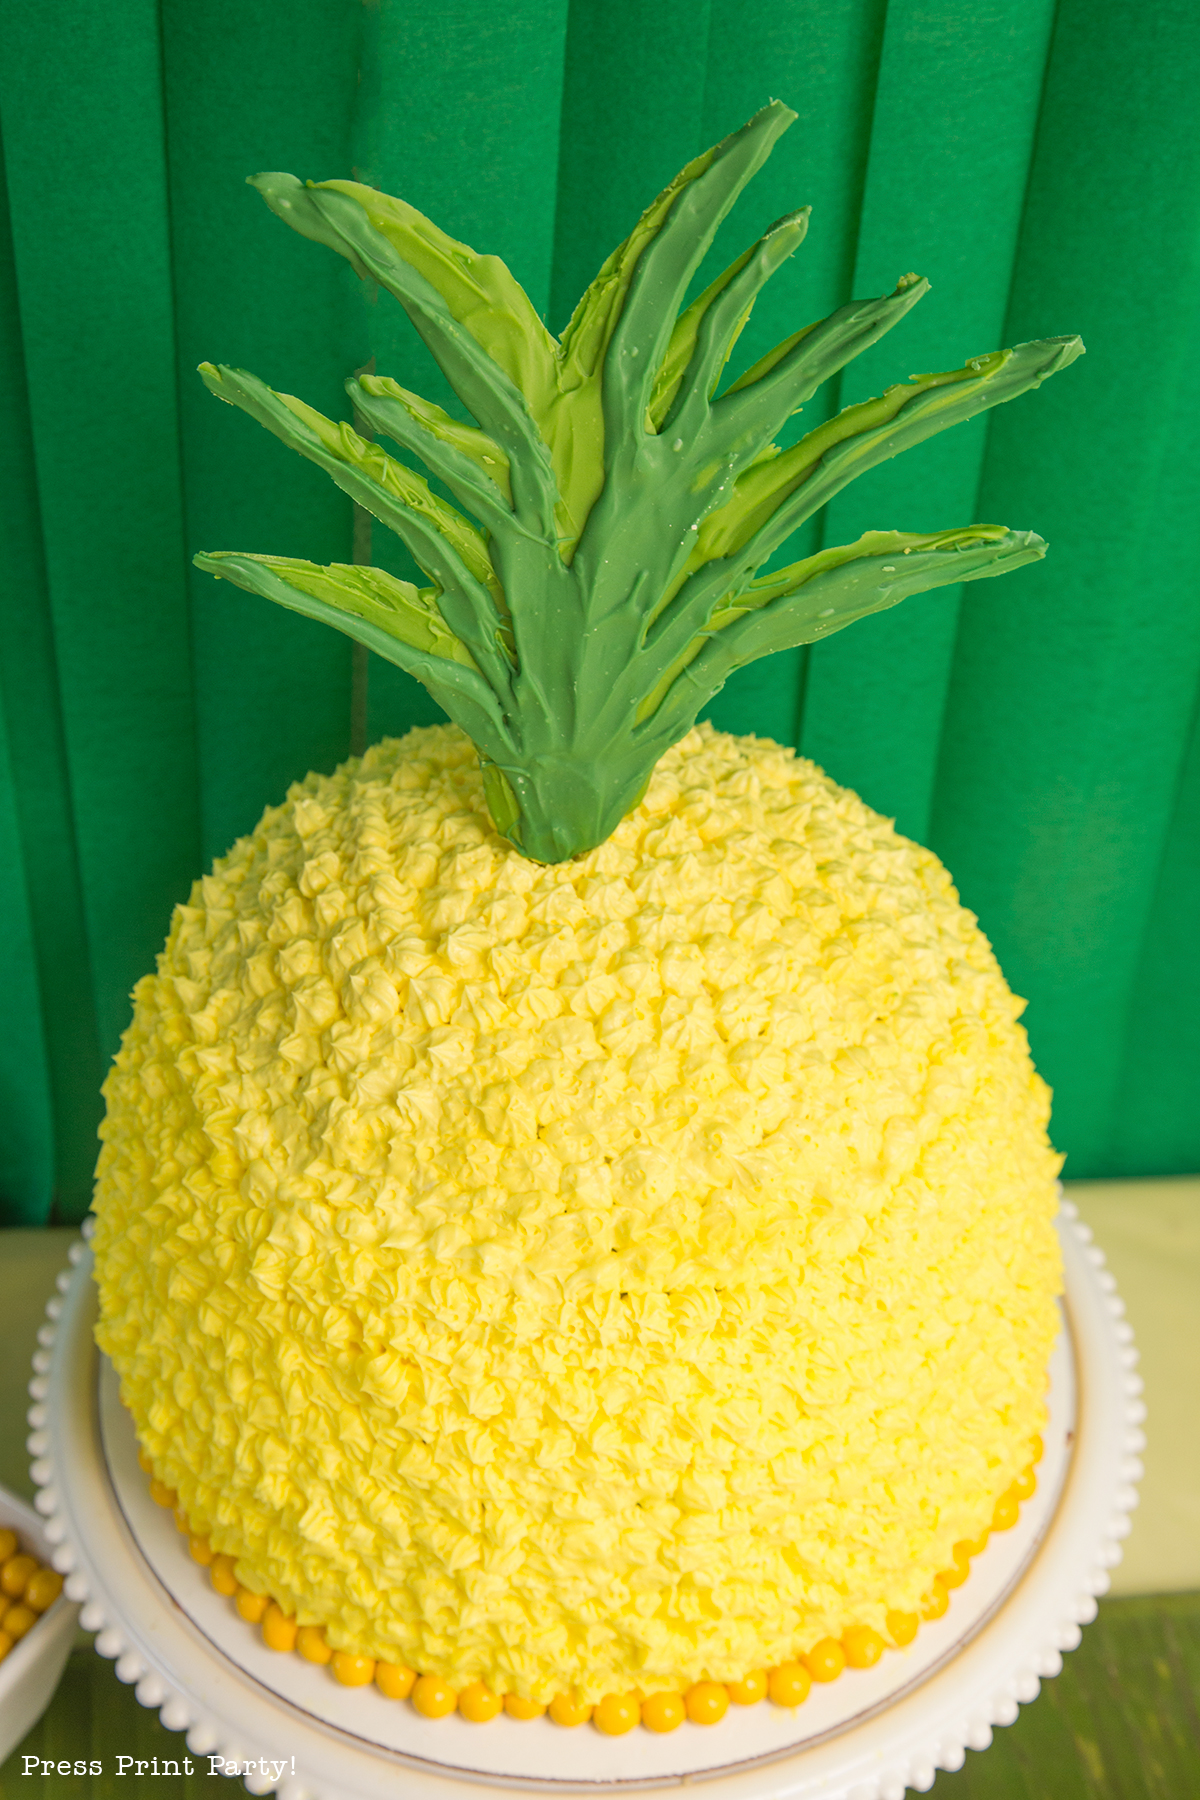 Party like a Pineapple -Pineapple party - Luau Party - Pineapple cake - by Press Print Party!